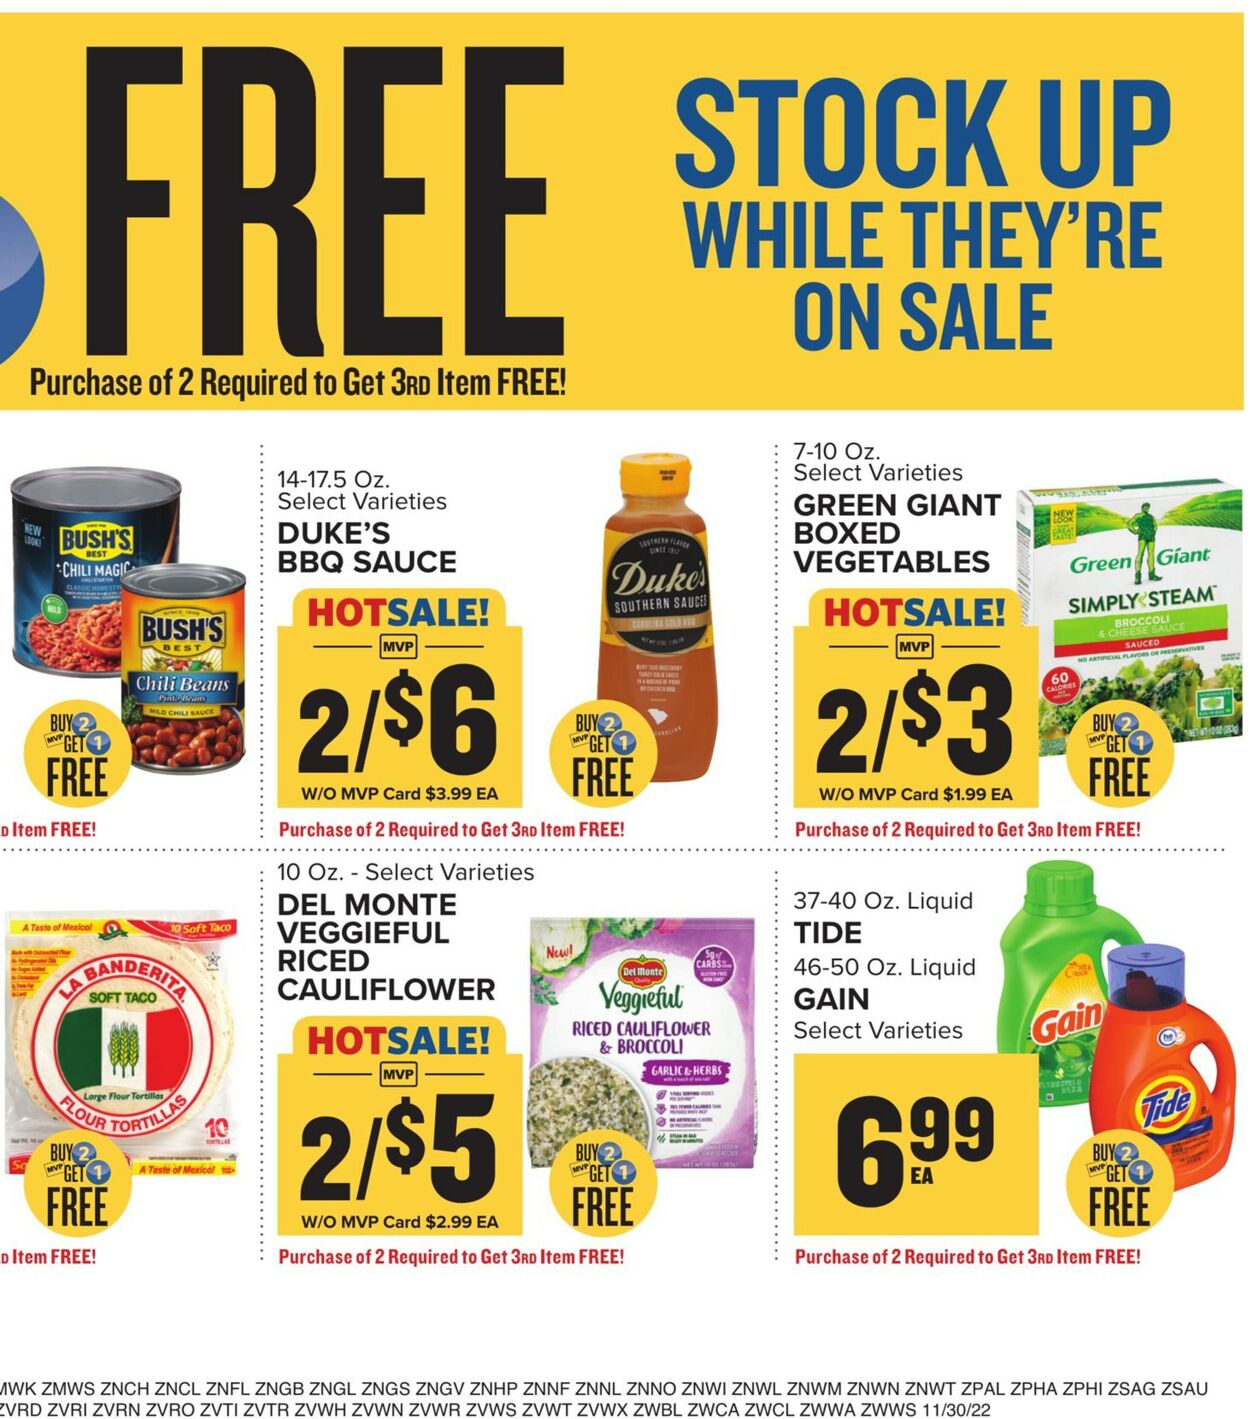 Catalogue Food Lion from 11/30/2022